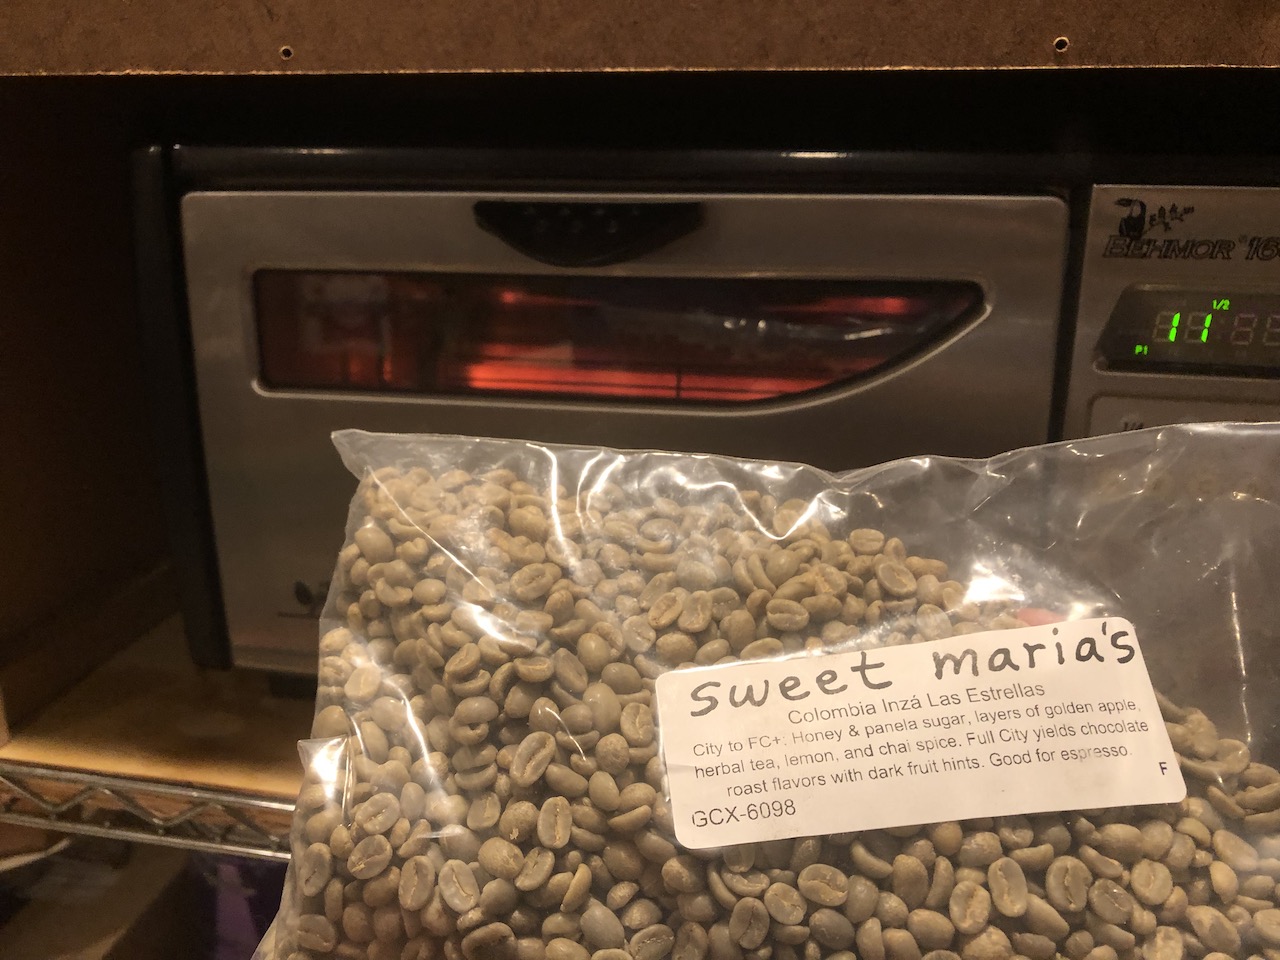 Pictured: In the background, my @behmor 1600+ coffee roaster, pre-heating (the elements are glowing red). In the foreground, a bag containing the remaining pound of Colombian green coffee beans from @sweetmarias, about to be roasted.